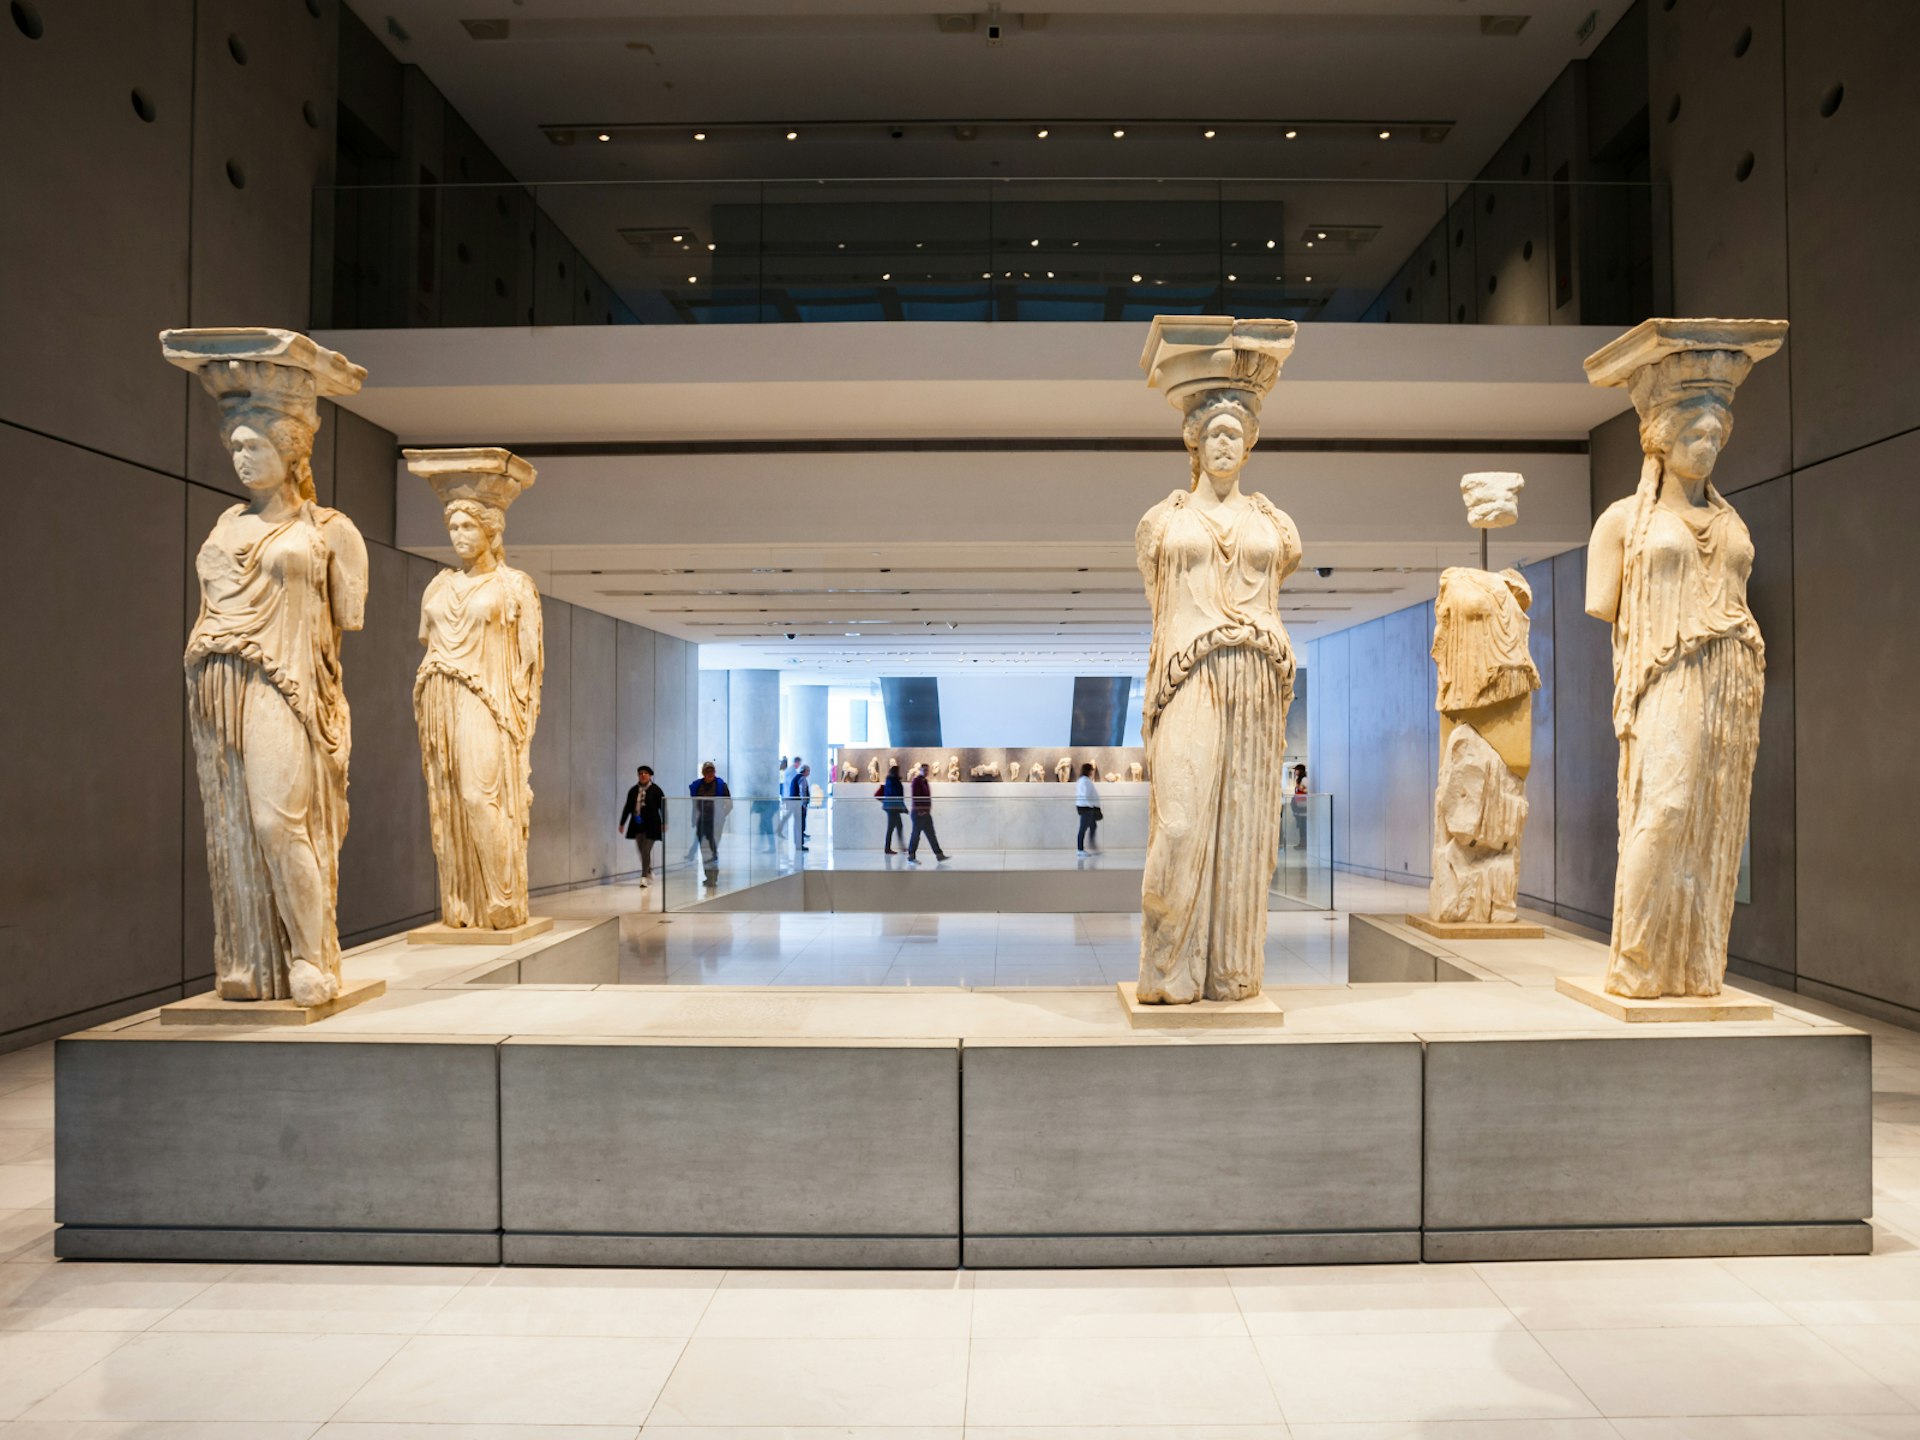 Five armless (and one headless) marble statues stand on a u-shaped plinth